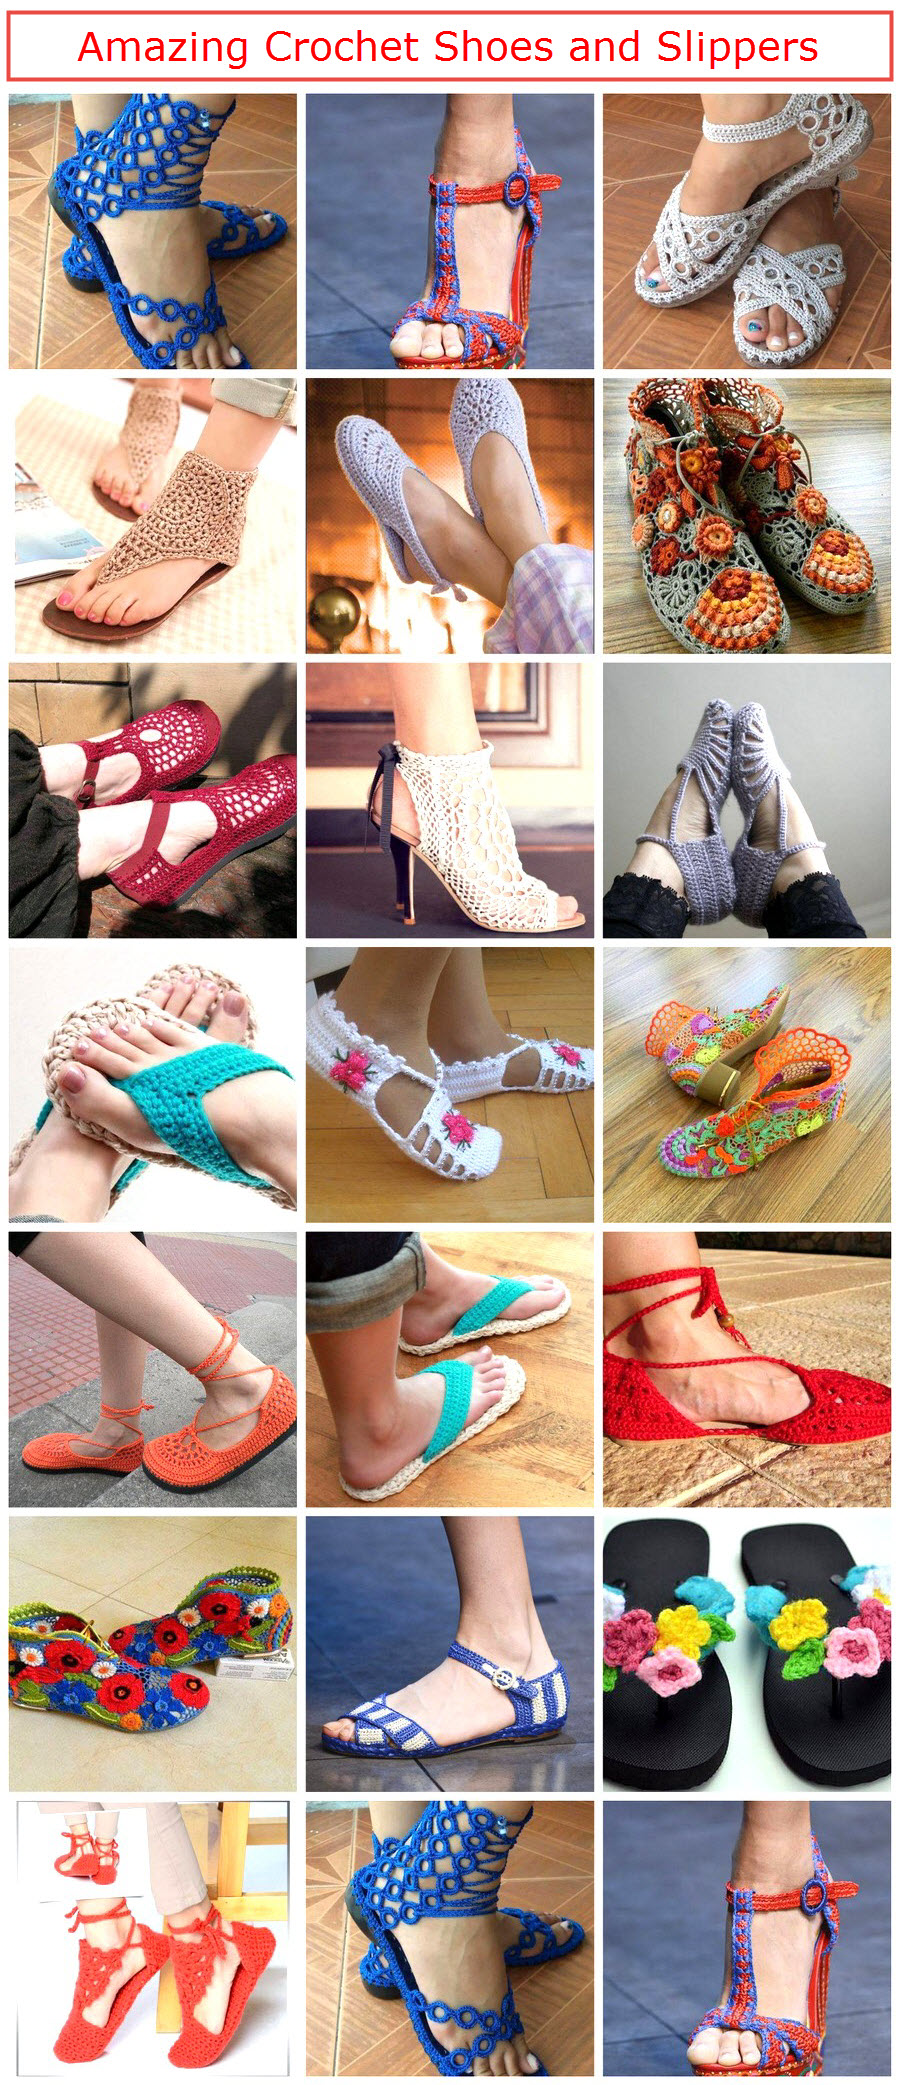 Amazing Crochet Shoes and Slippers – 1001 Crochet